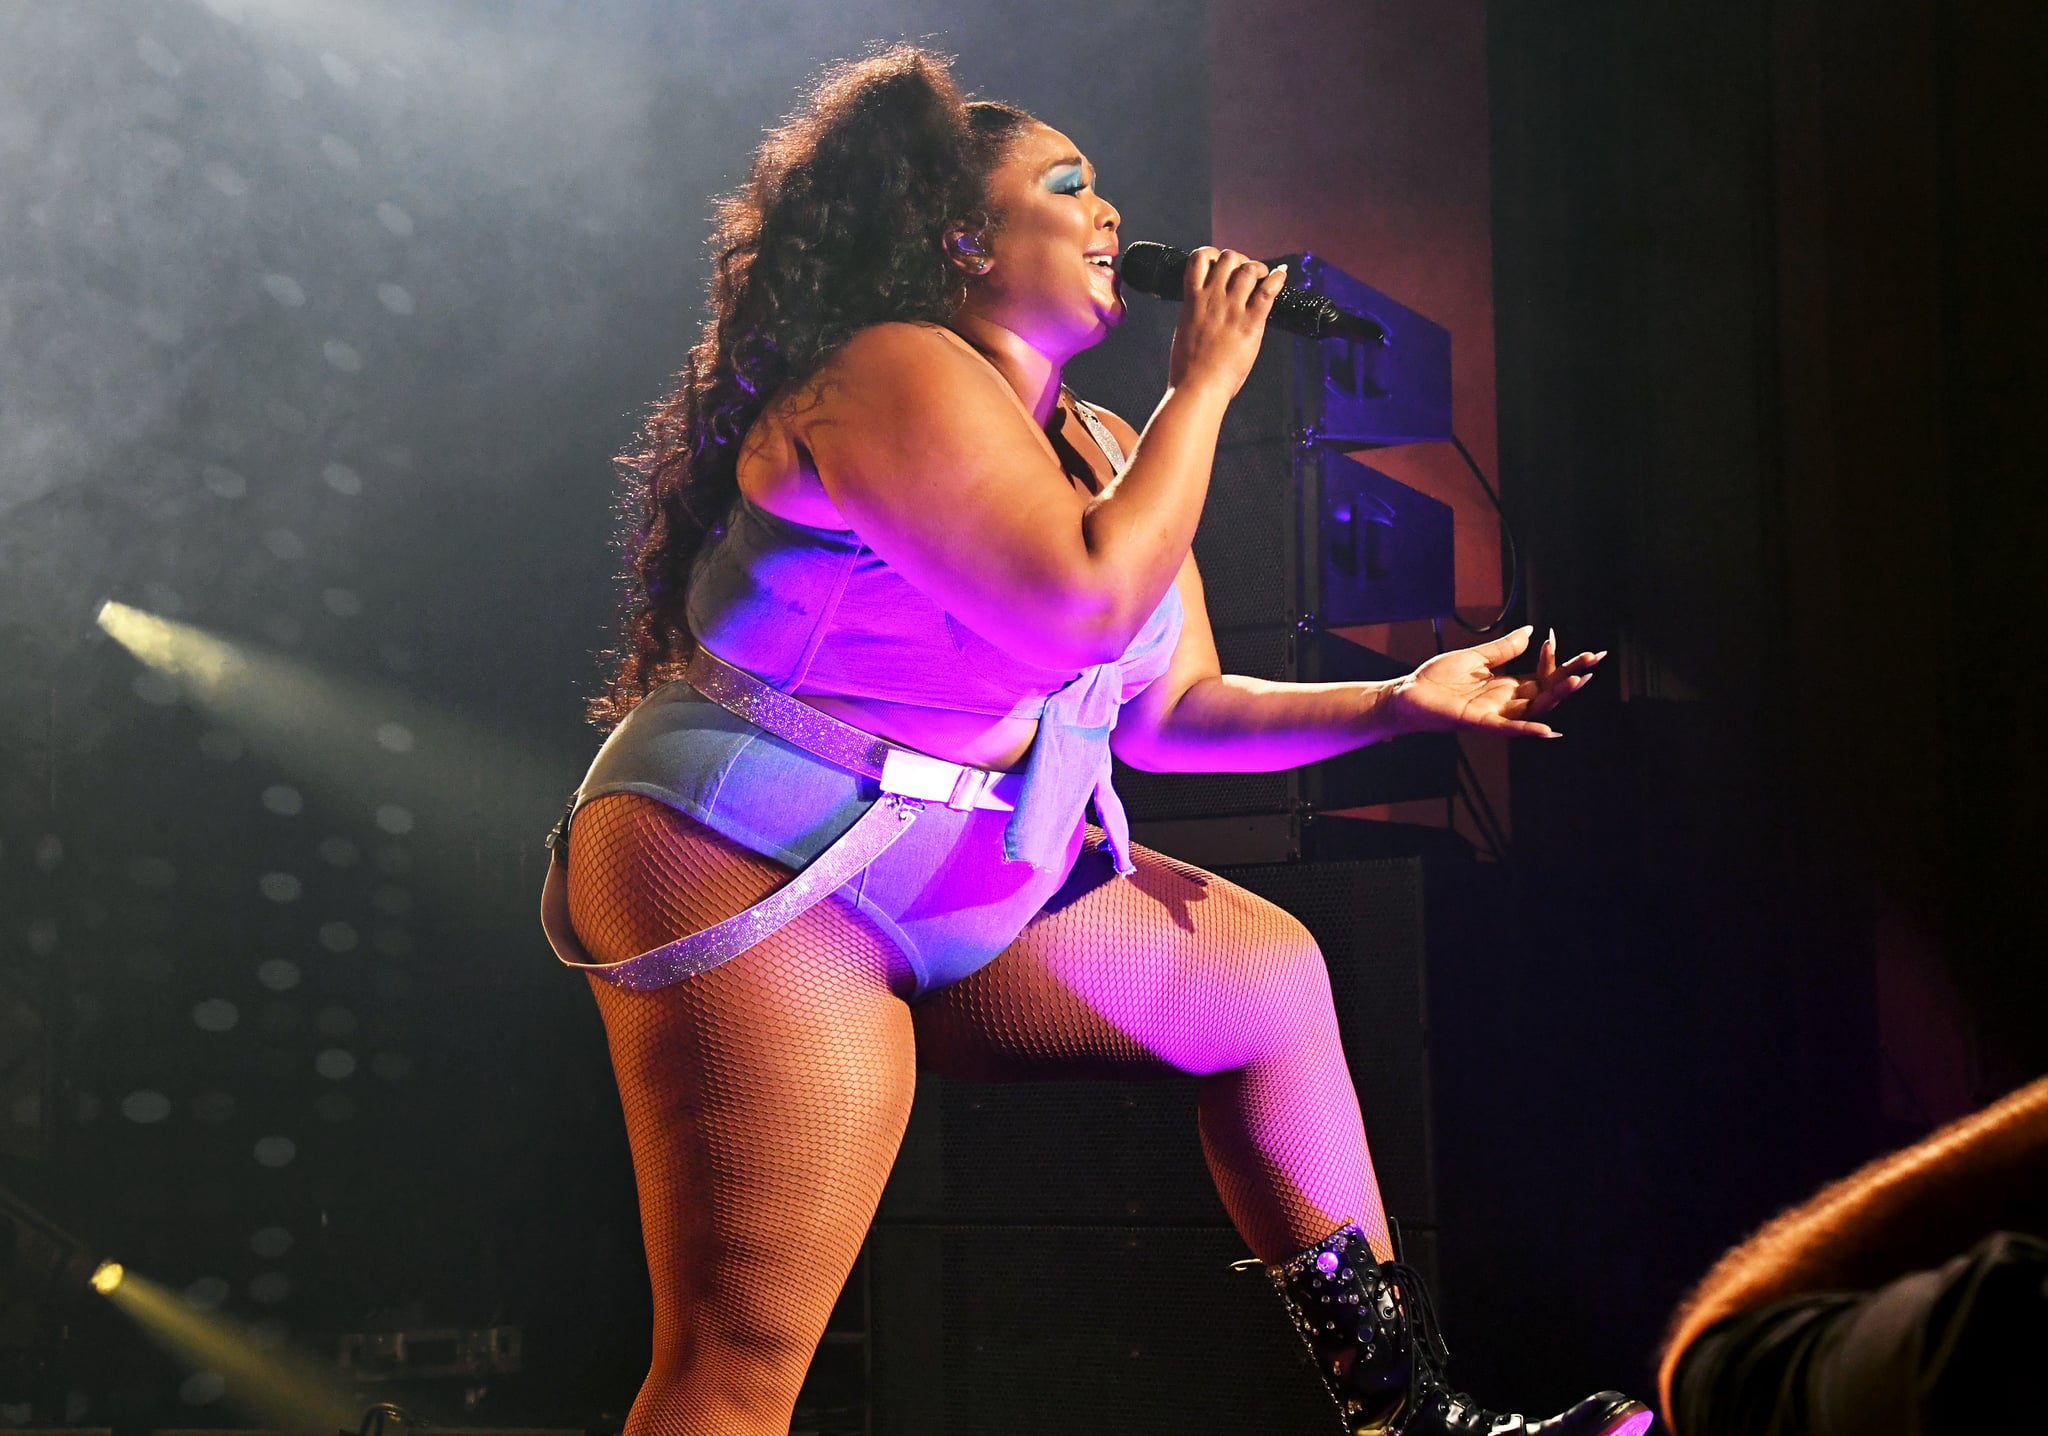 MIAMI BEACH, FLORIDA - JANUARY 30: Lizzo performs an exclusive concert for the SiriusXM and Pandora Opening Drive Super Concert Series, airing live on SiriusXM's The Heat channel, at the Fillmore Miami Beach during Super Bowl Week on January 30, 2020 in Miami Beach, Florida. (Photo by Kevin Mazur/Getty Images for Pandora)